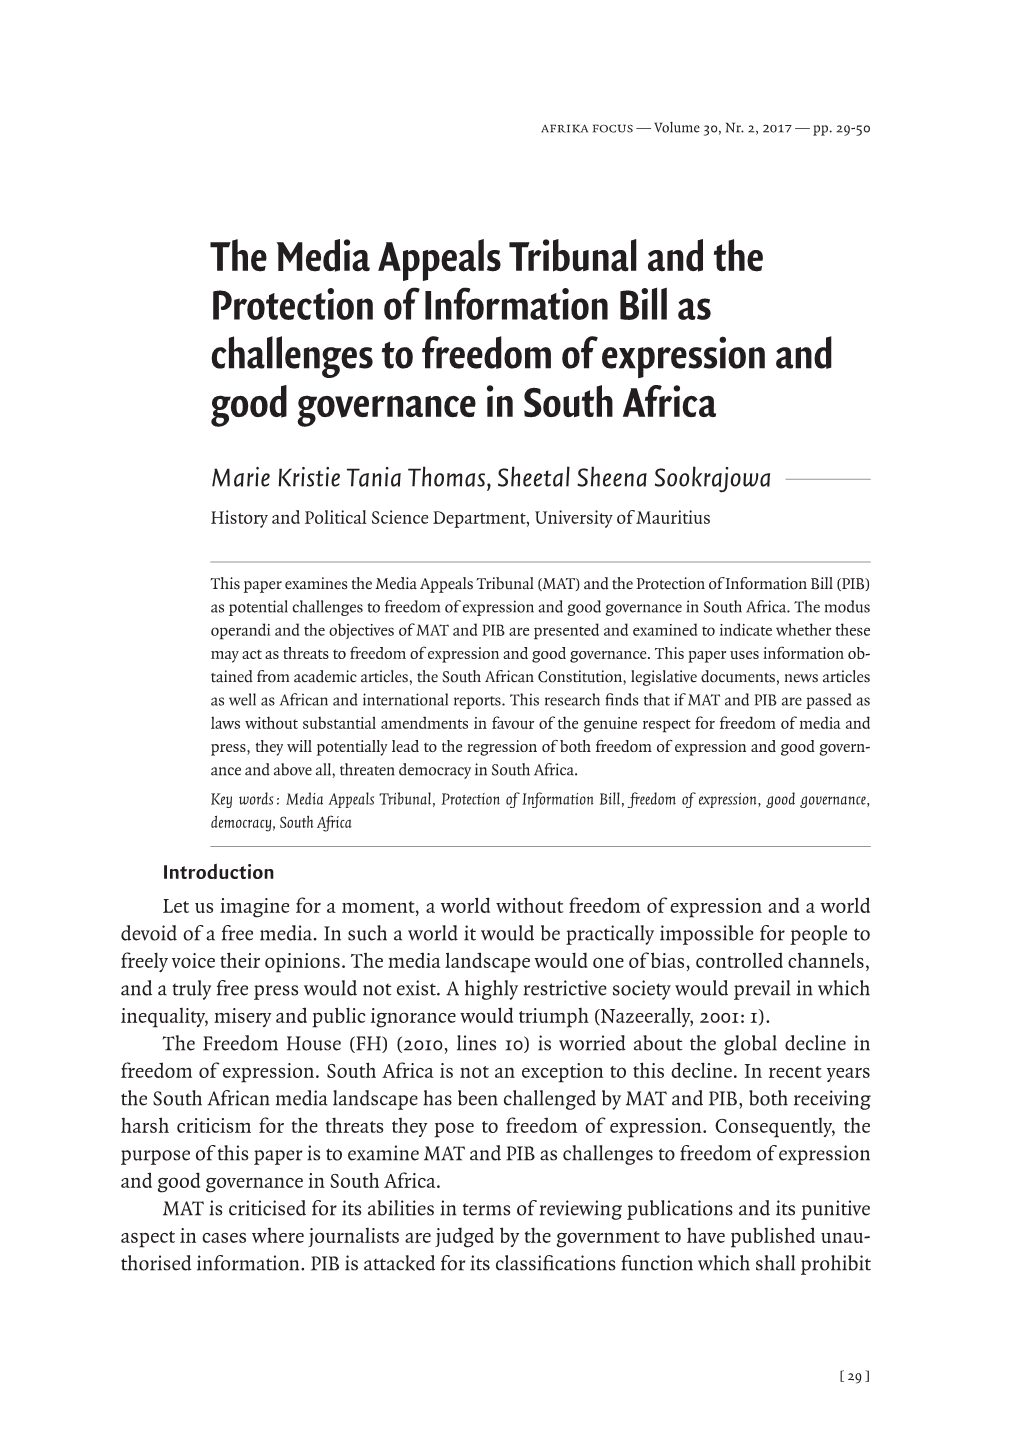 The Media Appeals Tribunal and the Protection of Information Bill As Challenges to Freedom of Expression and Good Governance in South Africa